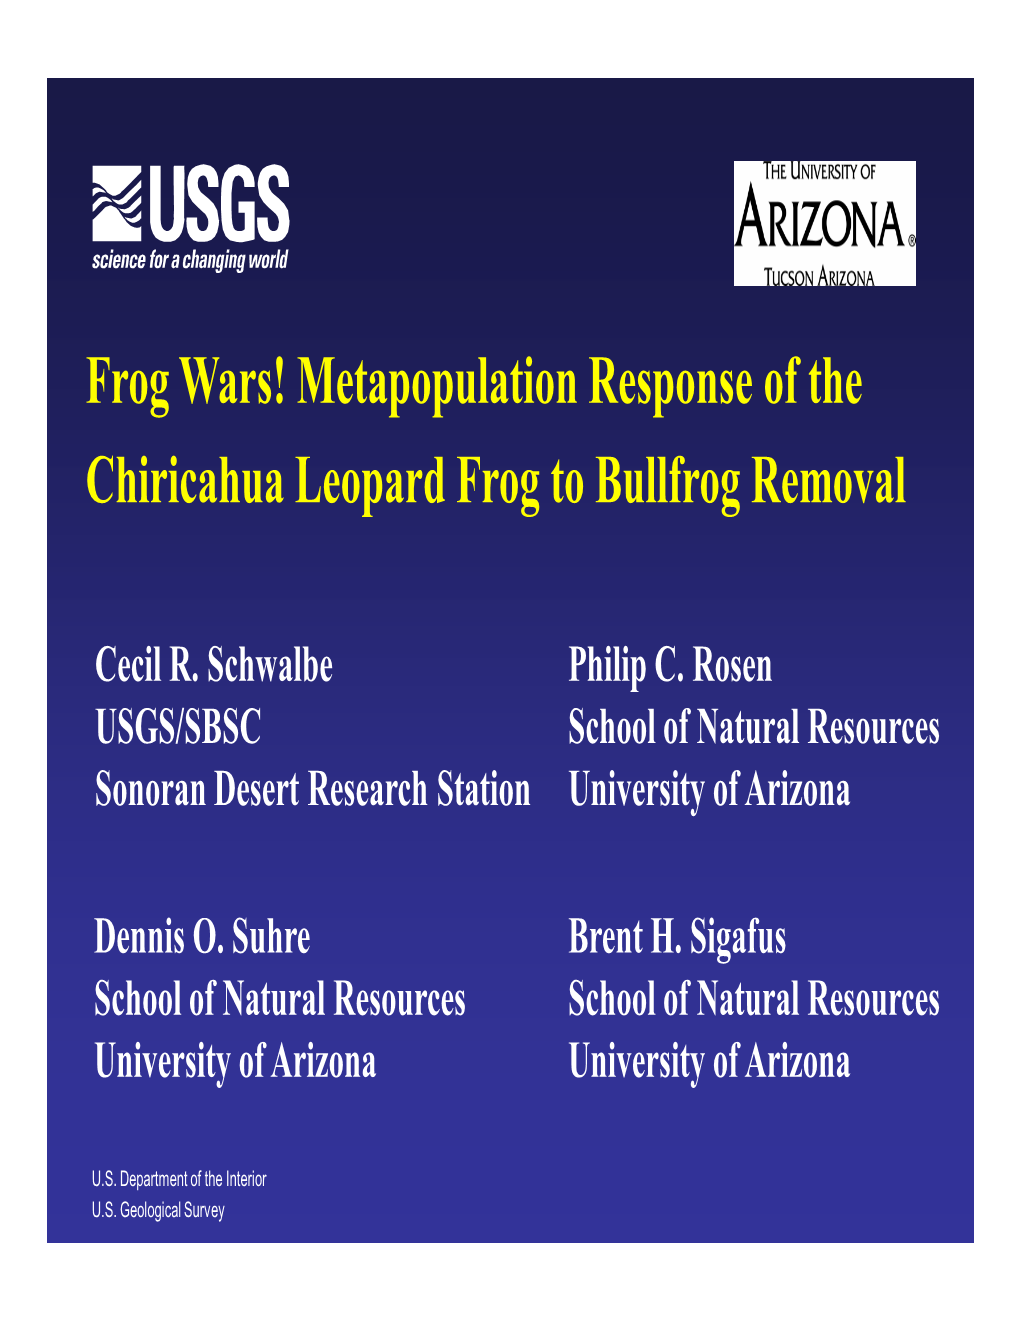 Metapopulation Response of the Chiricahua Leopard Frog to Bullfrog Removal